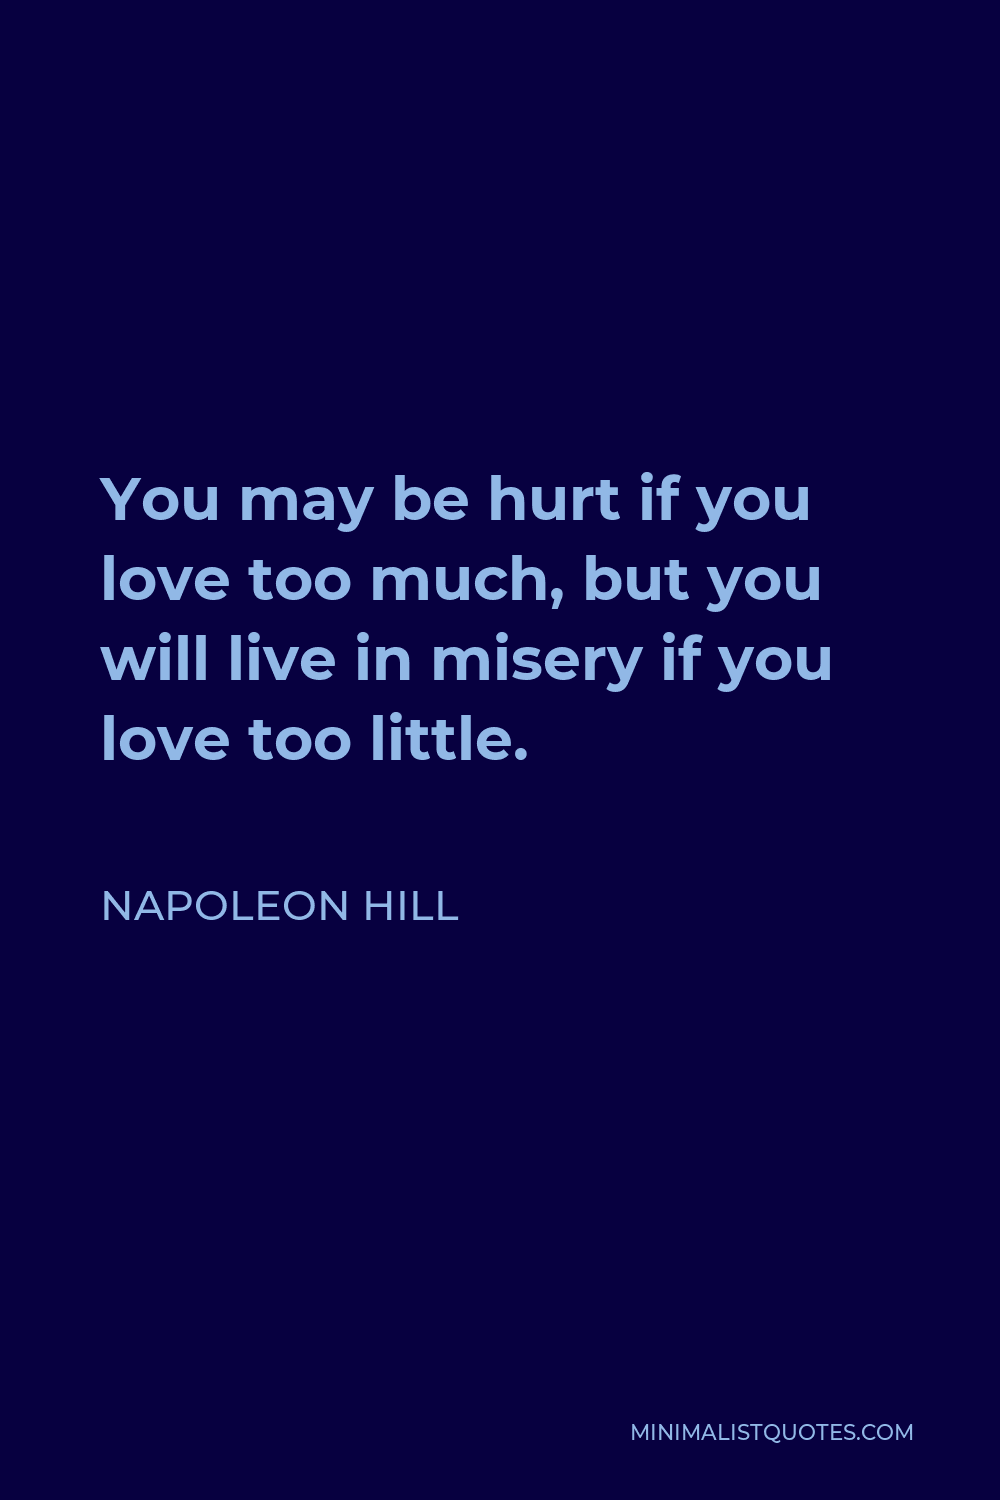 Napoleon Hill Quote - You may be hurt if you love too much, but you will live in misery if you love too little.